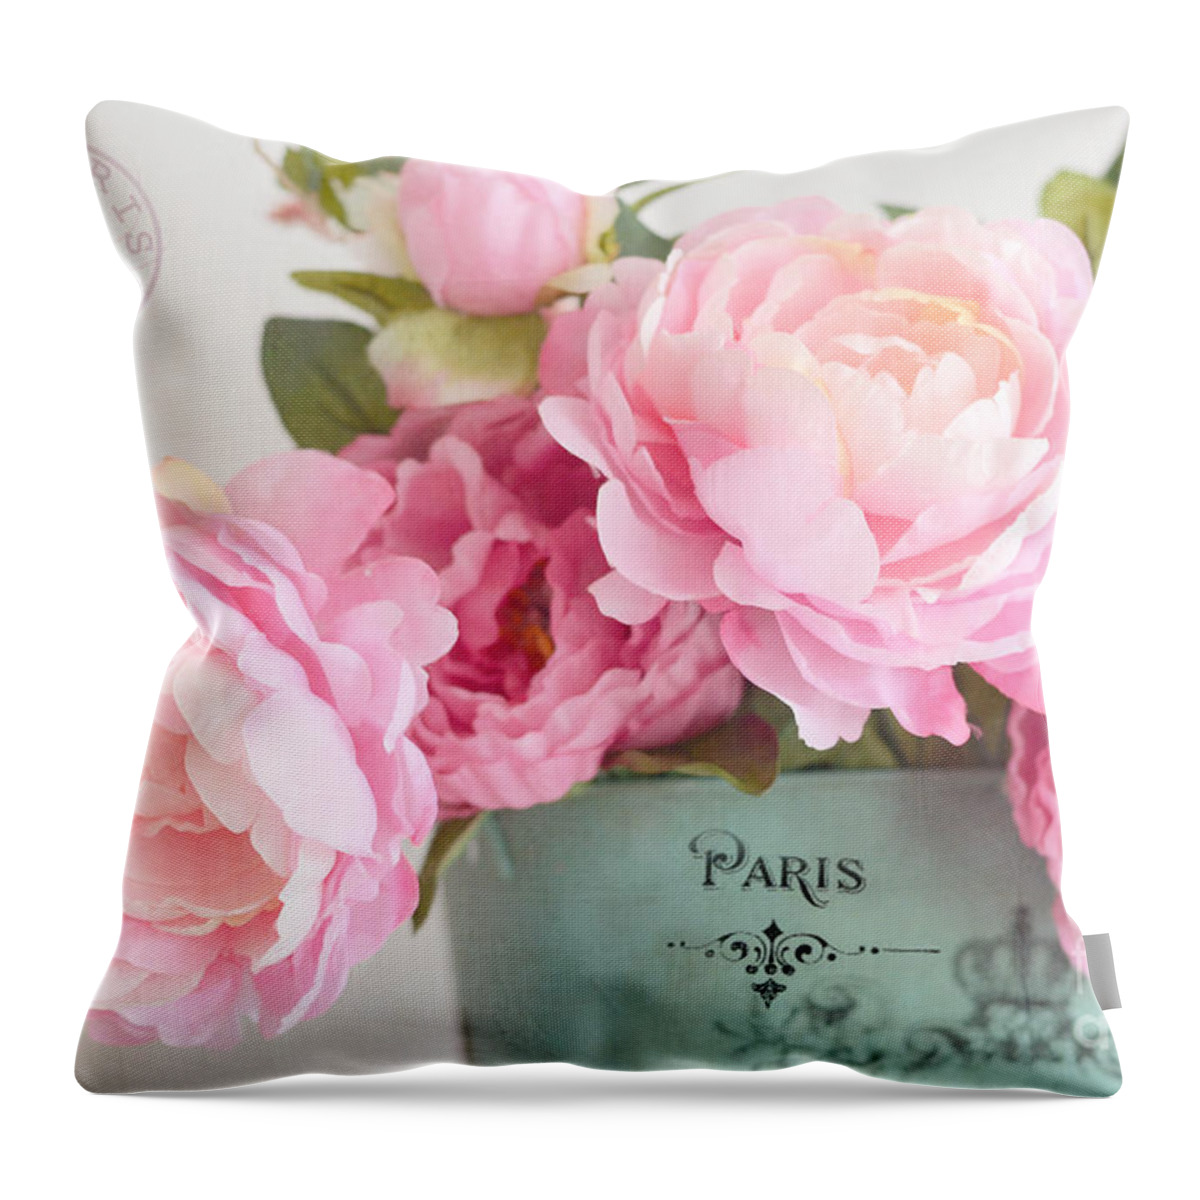 Paris Throw Pillow featuring the photograph Paris Peonies Shabby Chic Dreamy Pink Peonies Romantic Cottage Chic Paris Peonies Floral Art by Kathy Fornal